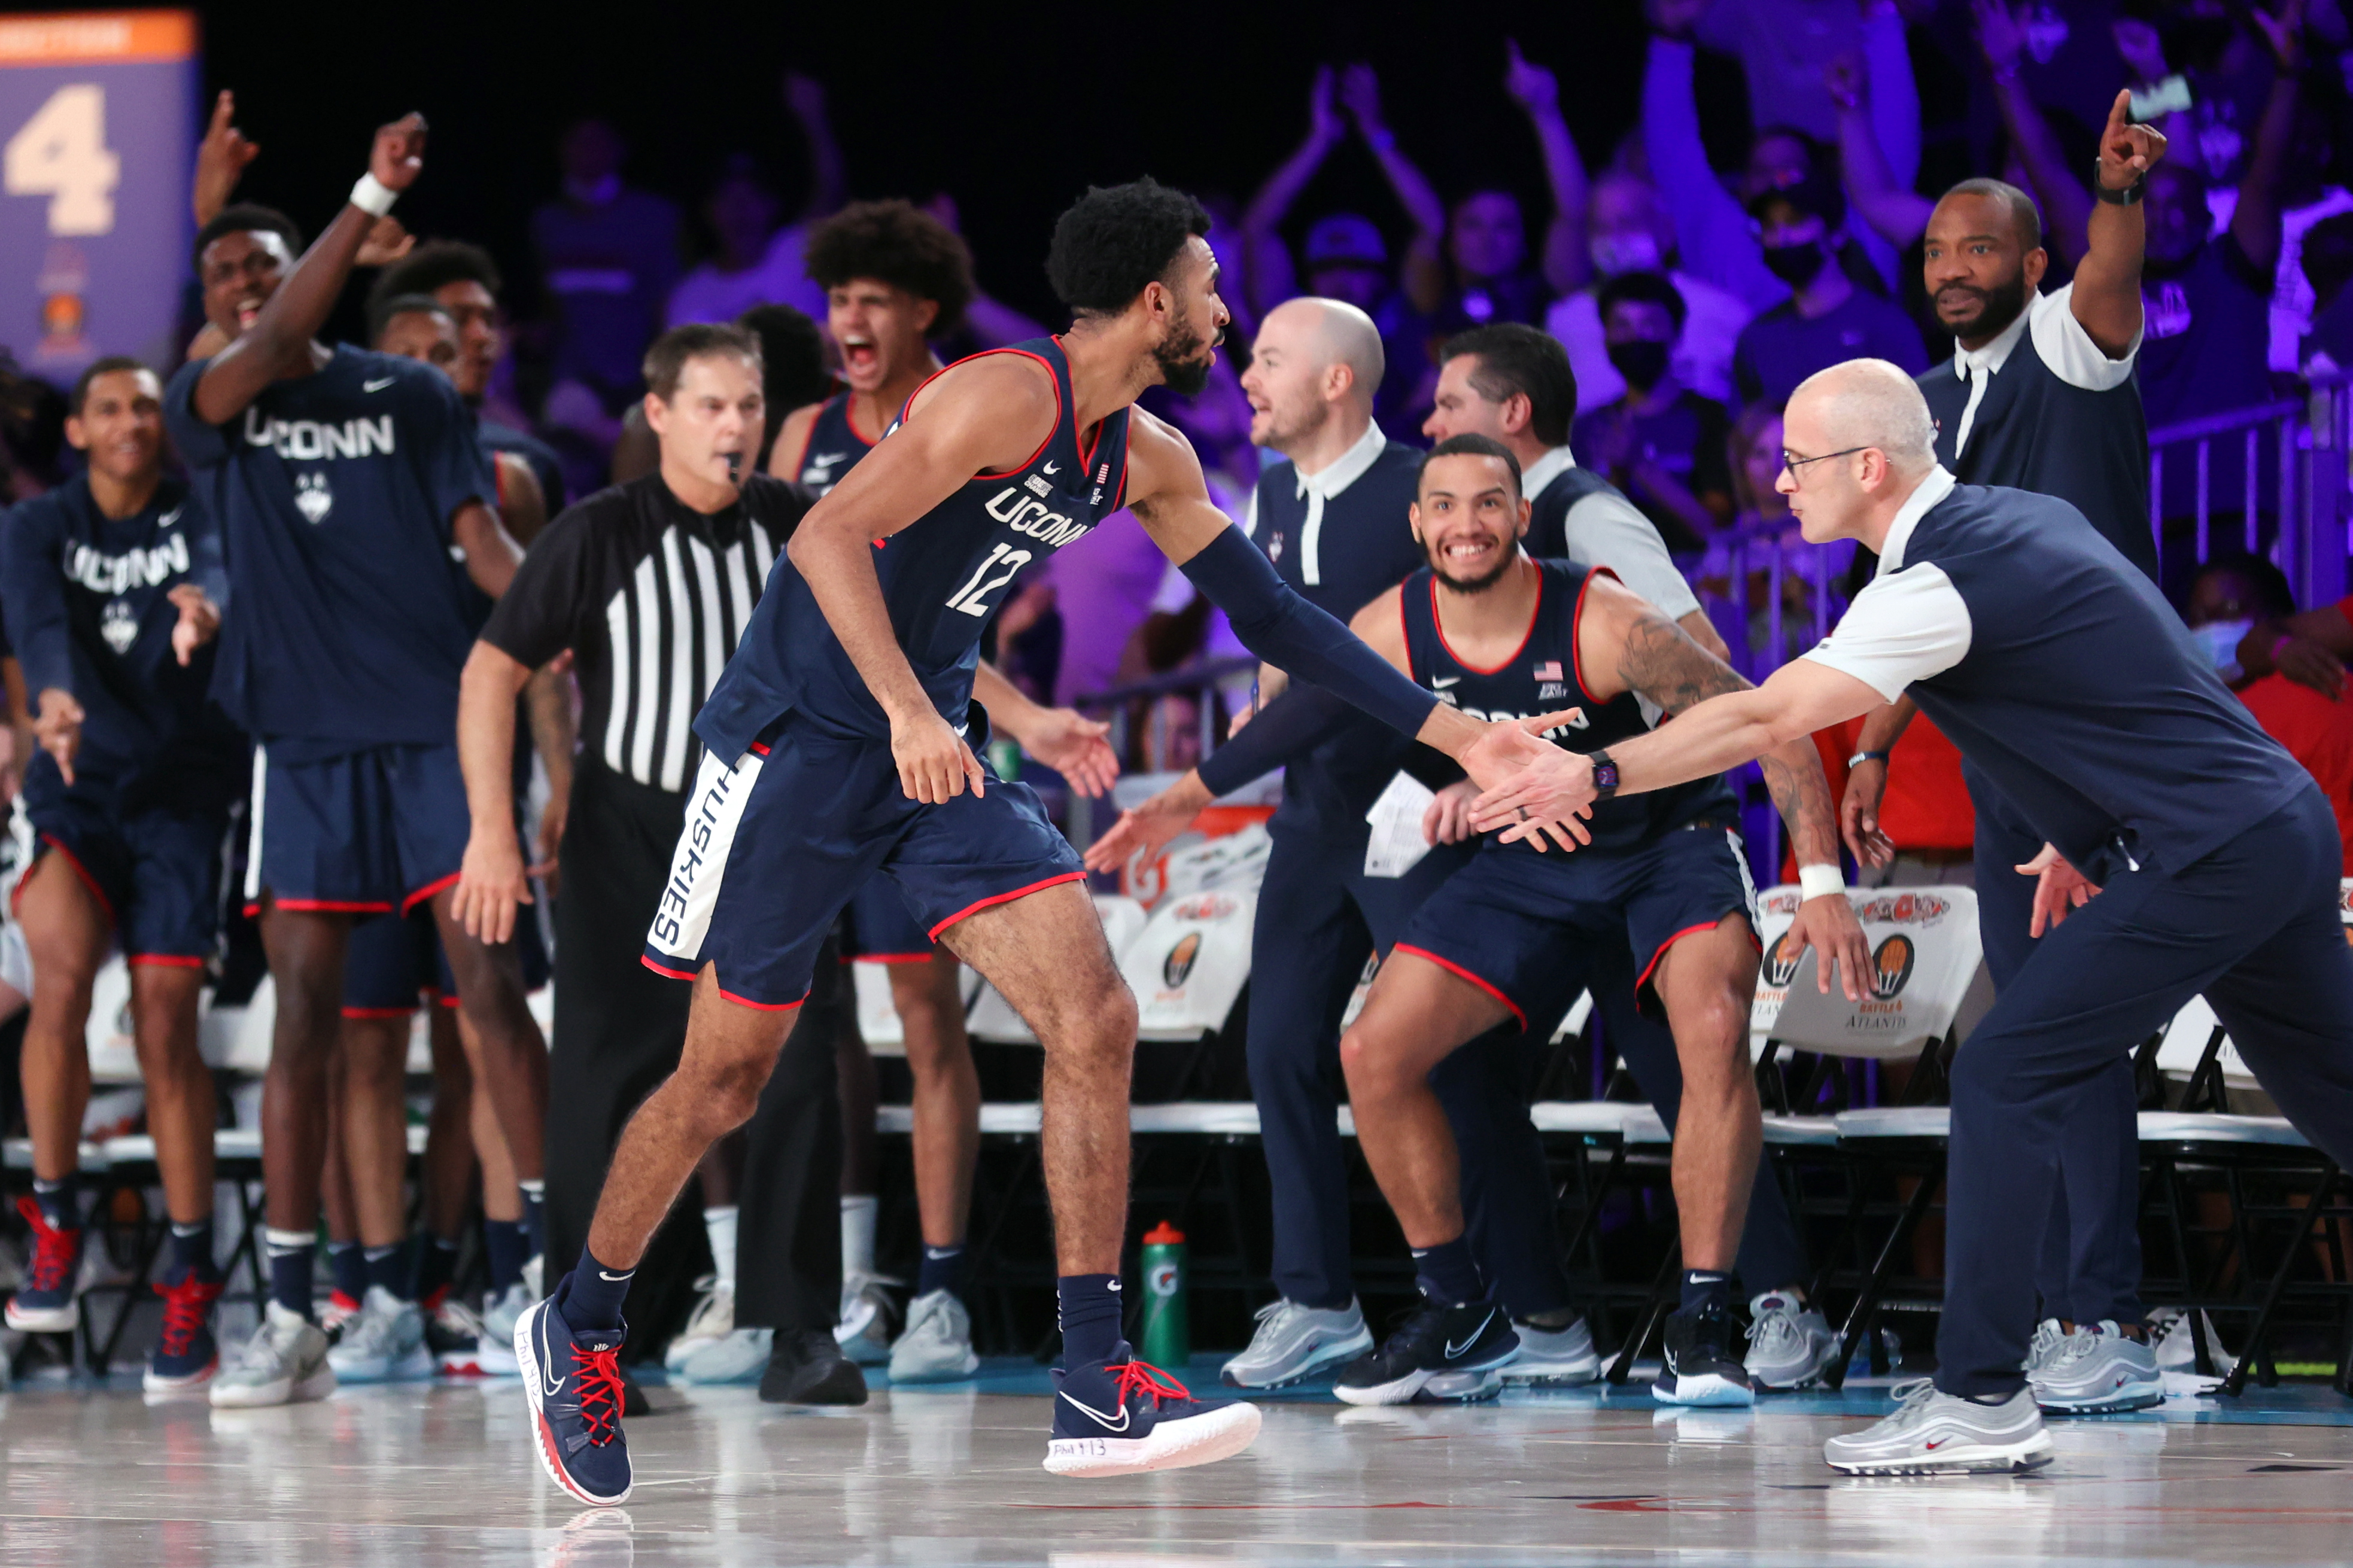 UConn forward Tyler Polley is congratulated by coach Dan Hurley after making a 3-pointer against Auburn in the second overtime of an NCAA college basketball game at Paradise Island, Bahamas, Wednesday, Nov. 24, 2021.